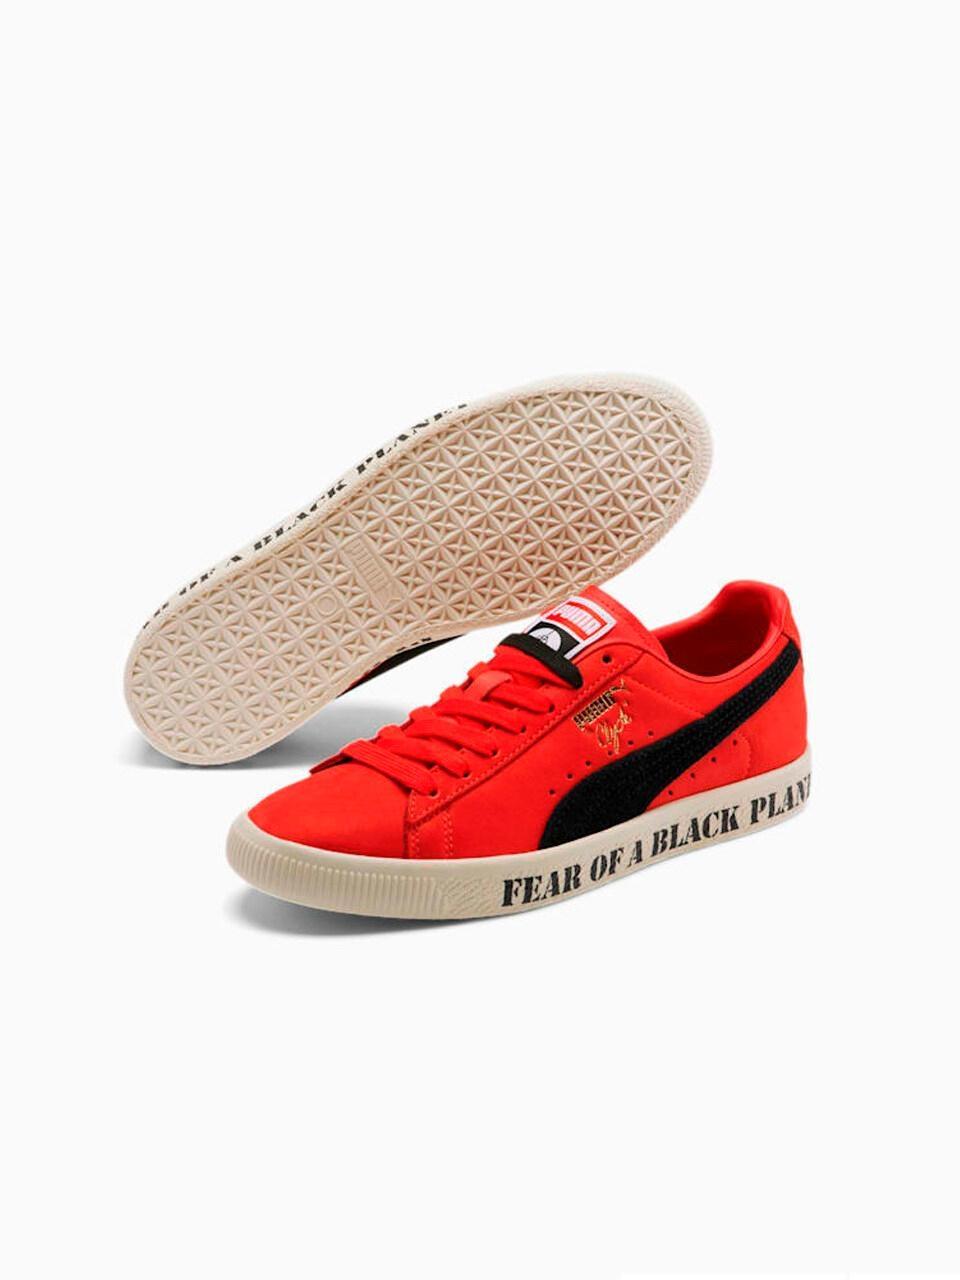 PUMA Lace X Public Enemy Clyde Sneakers in Black/Red (Red) for Men | Lyst